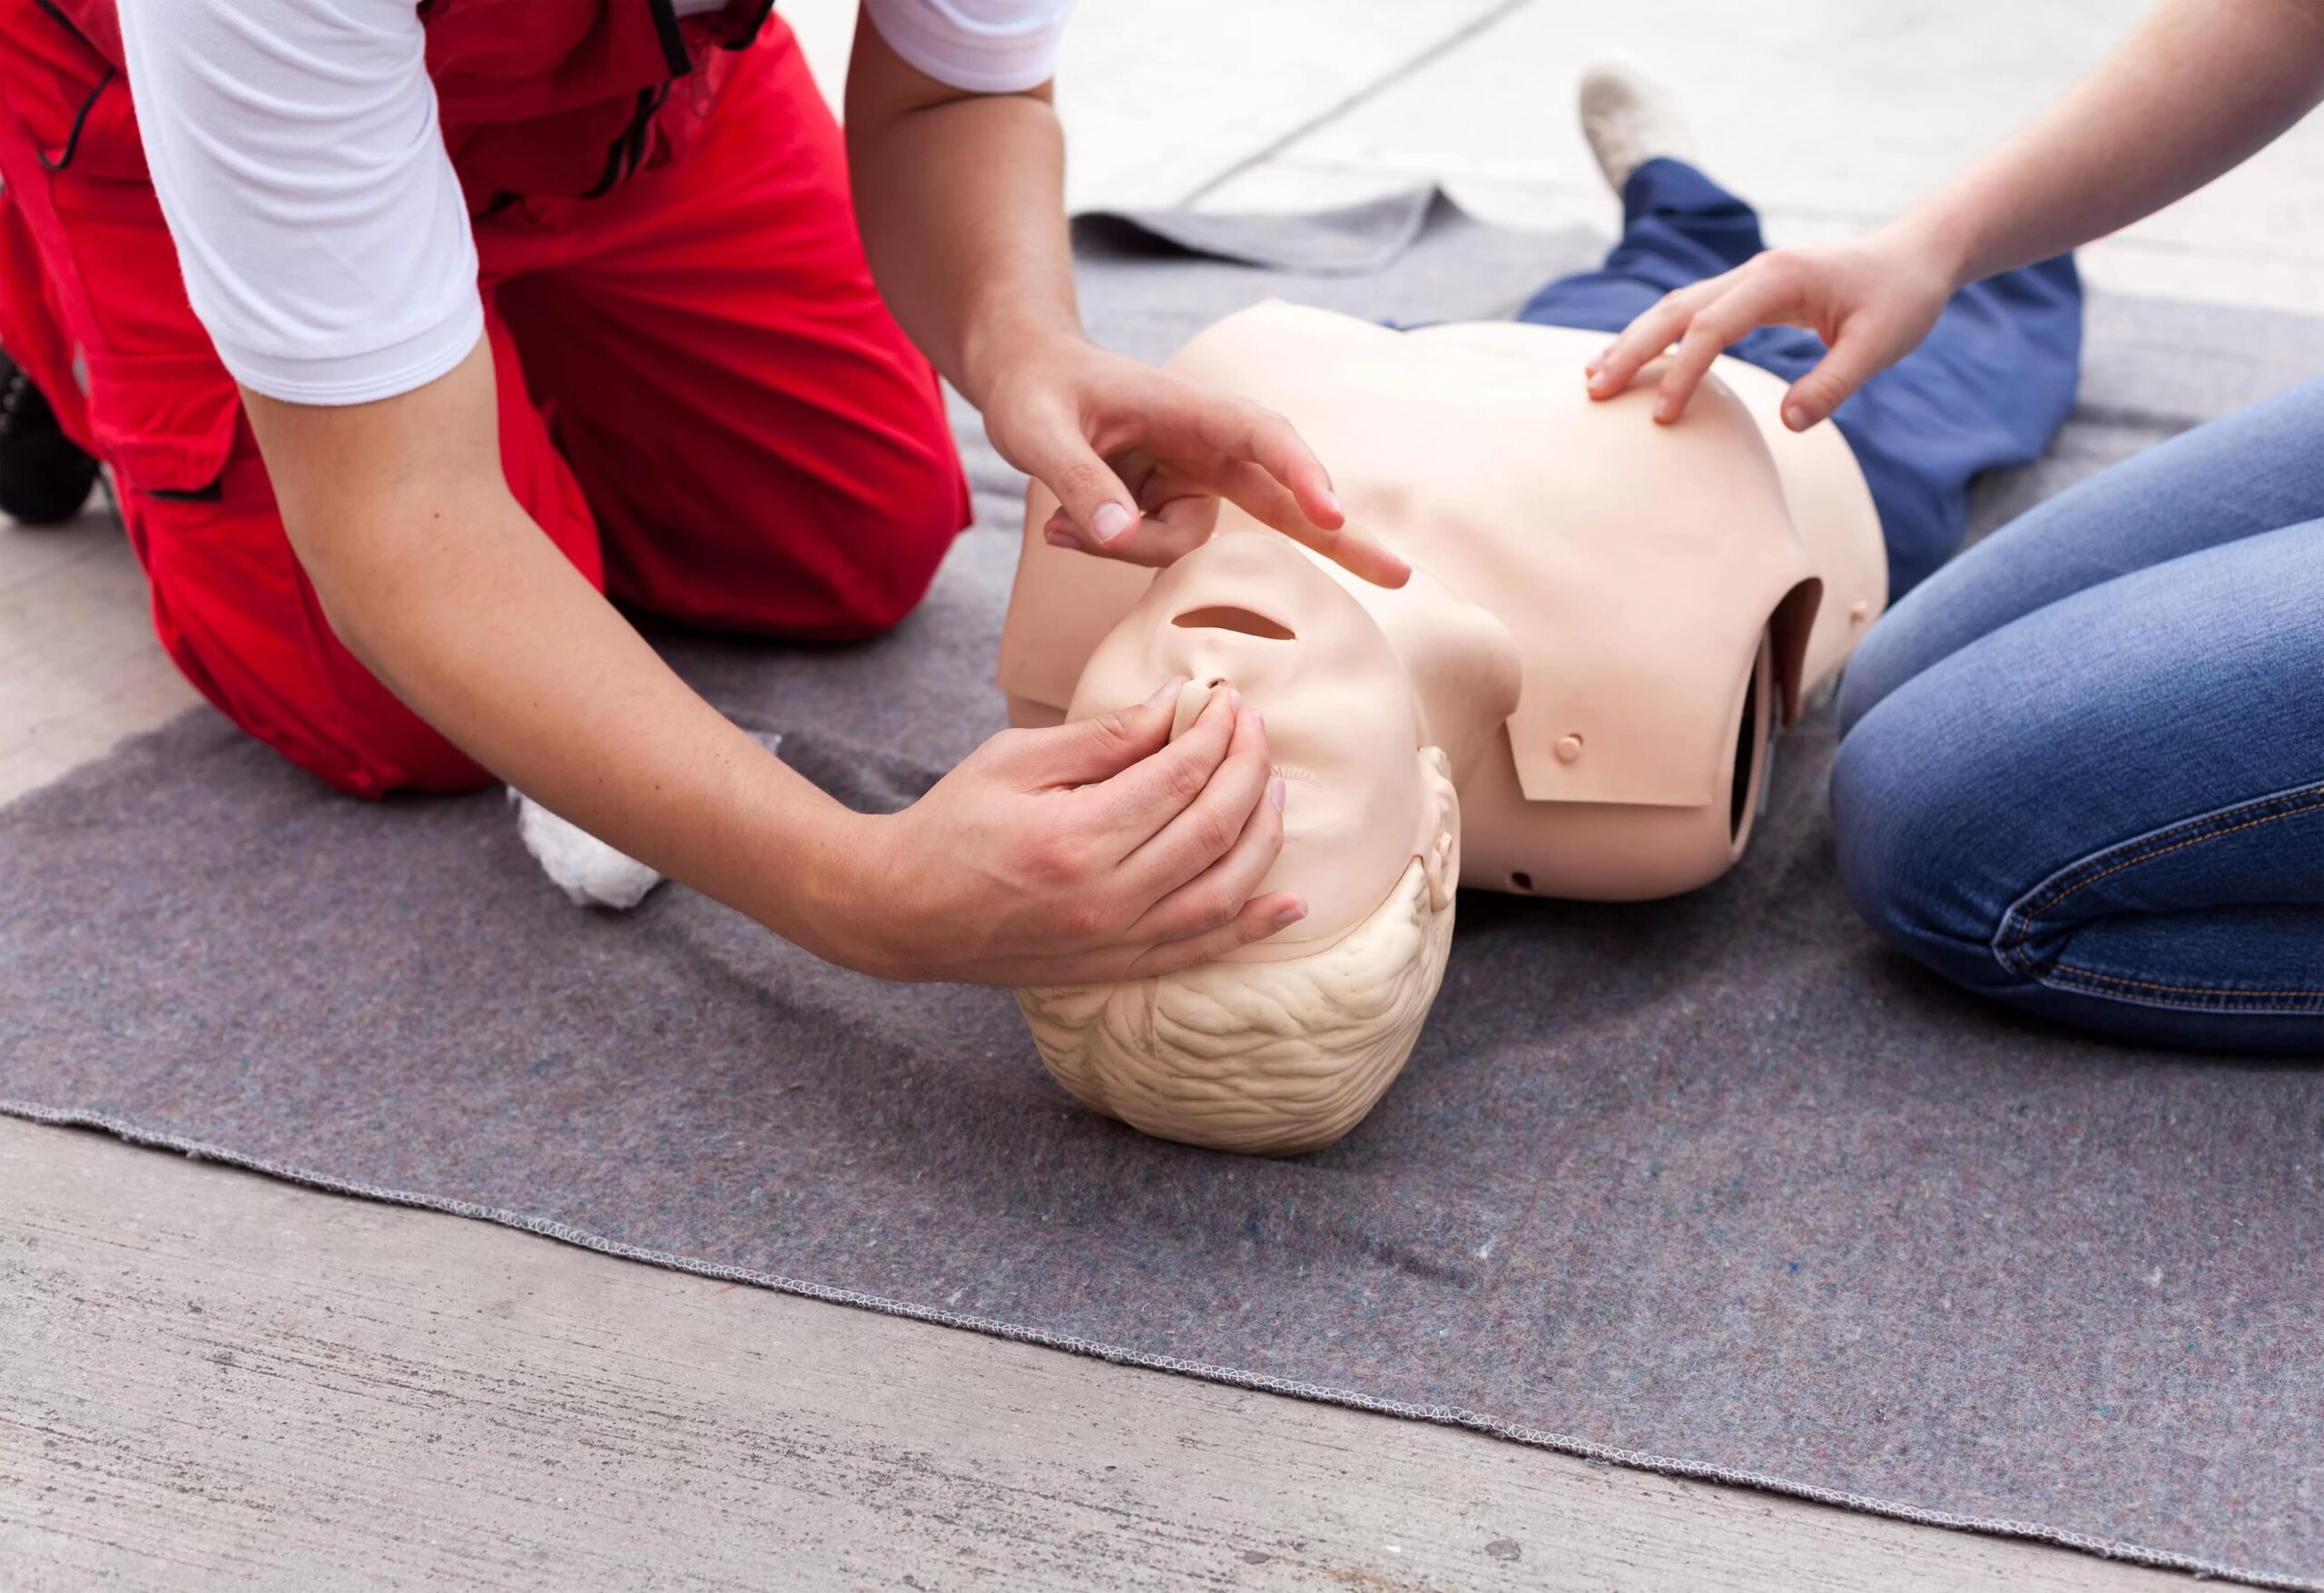 Reasons Why First Aid Training is Essential for Workplace Safety